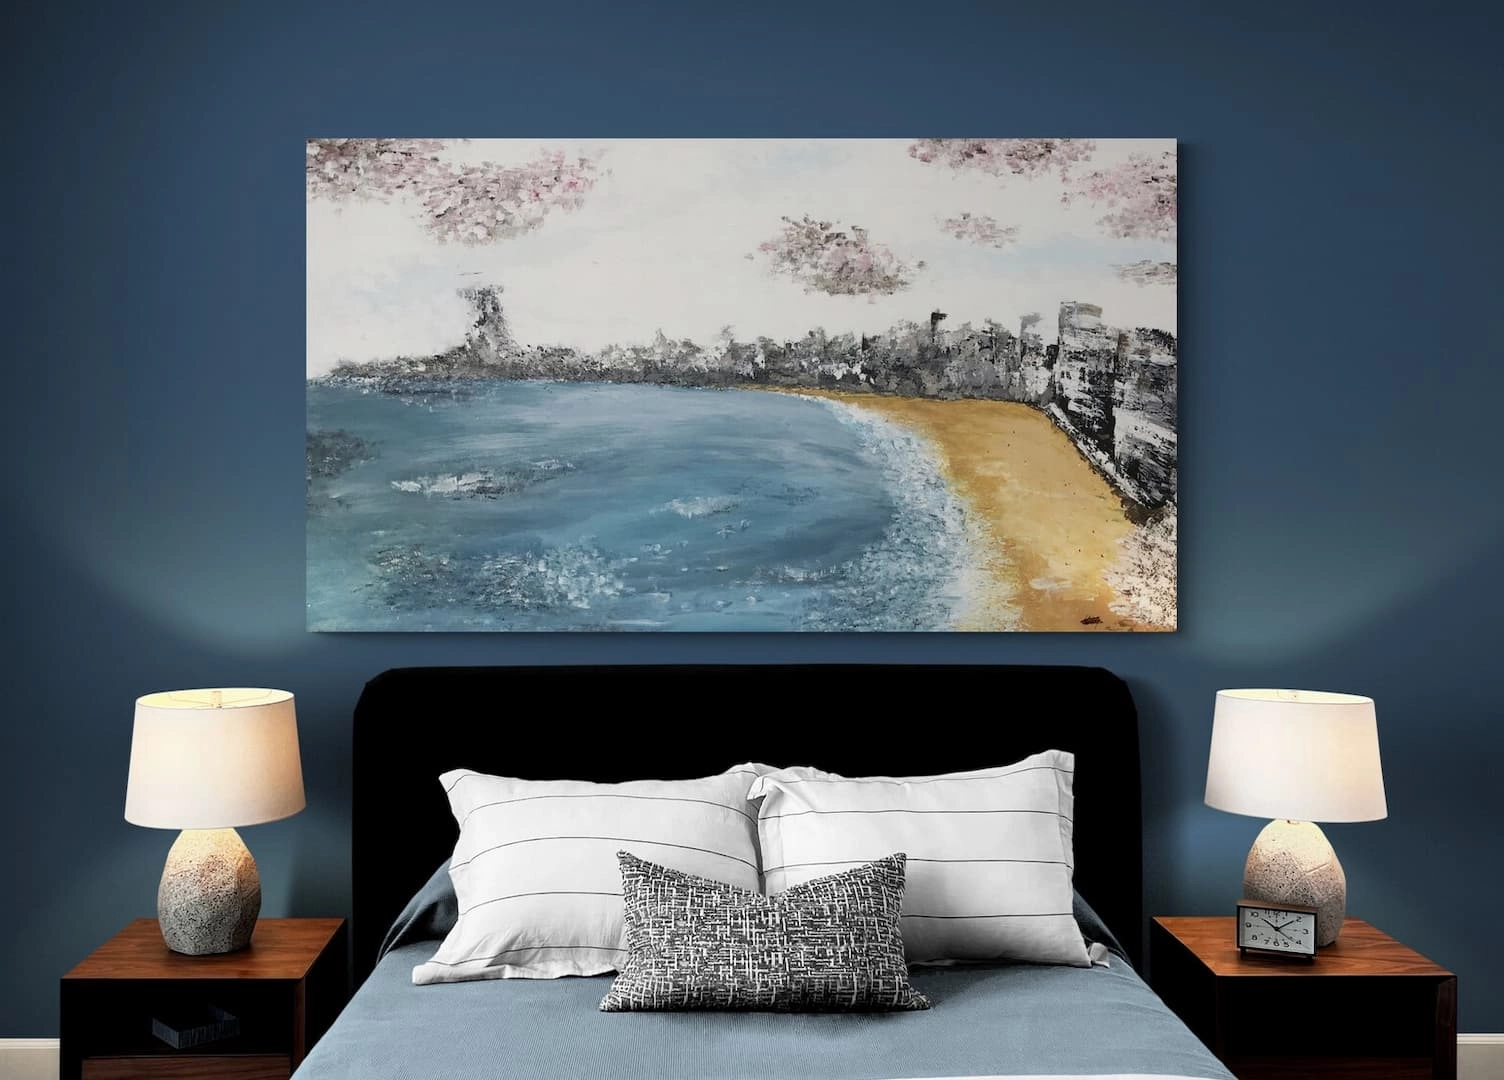 Bedrooms can be a place to put your sea paintings